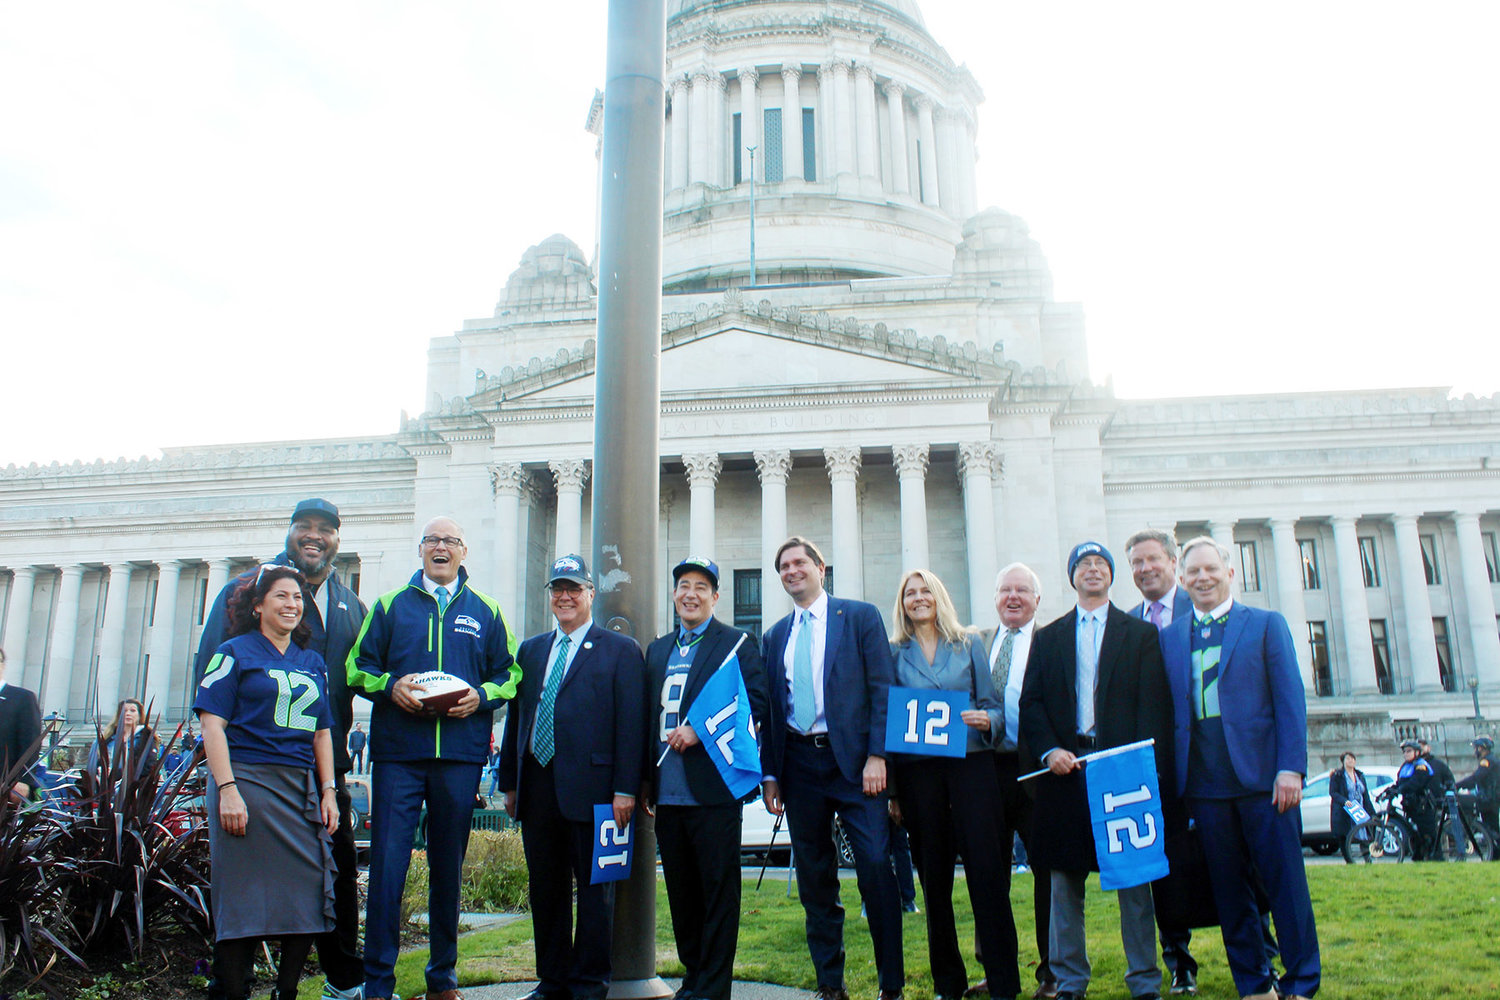 Gov. Jay Inslee, Secretary of State Steve Hobbs and other Washington lawmakers stand in front of the legislative building with Seahawks star Walter Jones after raising the 12th-man flag Jan. 11.